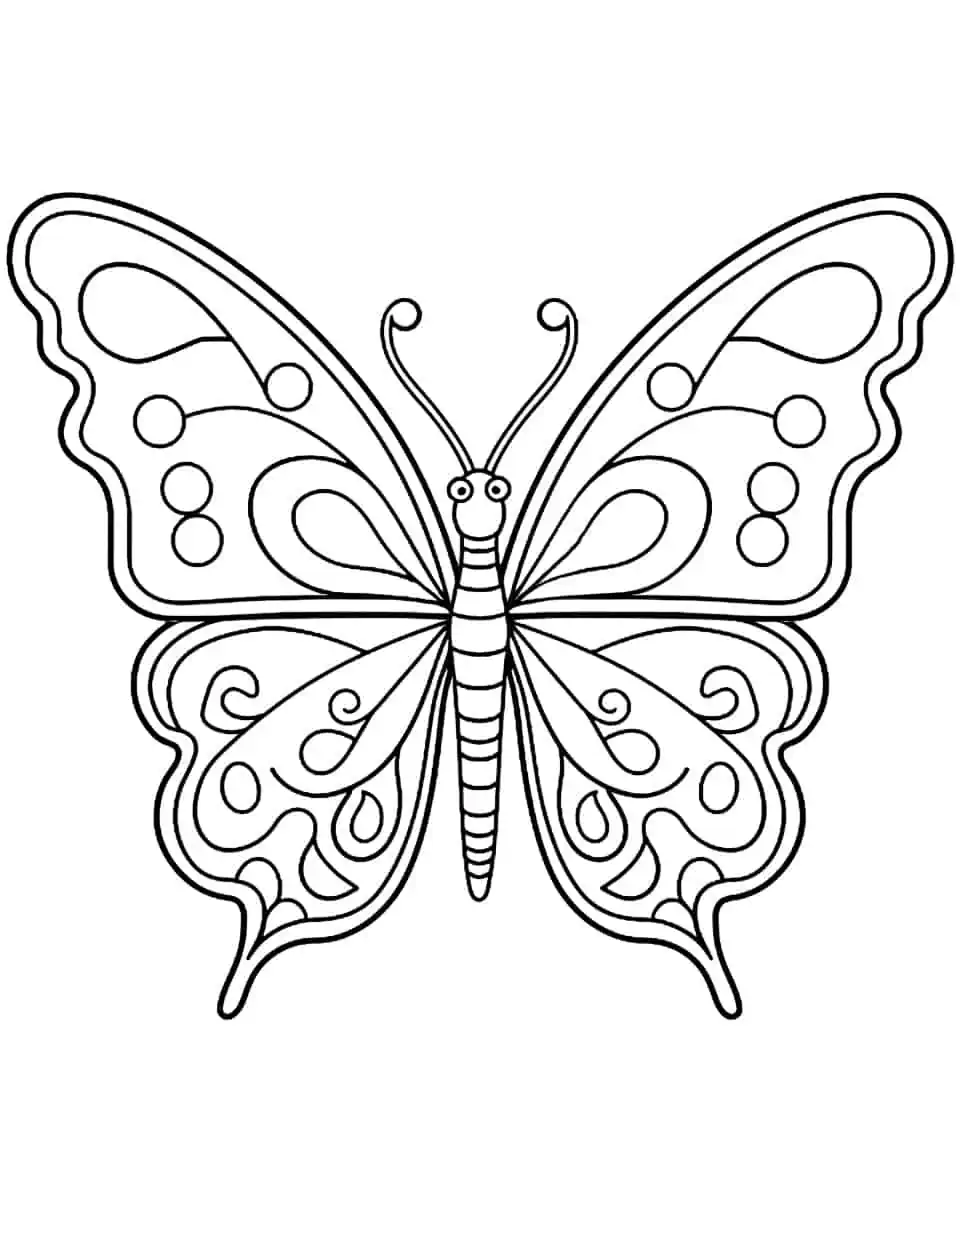 Whimsical Wingspan Butterfly Coloring Page - A coloring page featuring a butterfly with whimsical and exaggerated wing patterns.